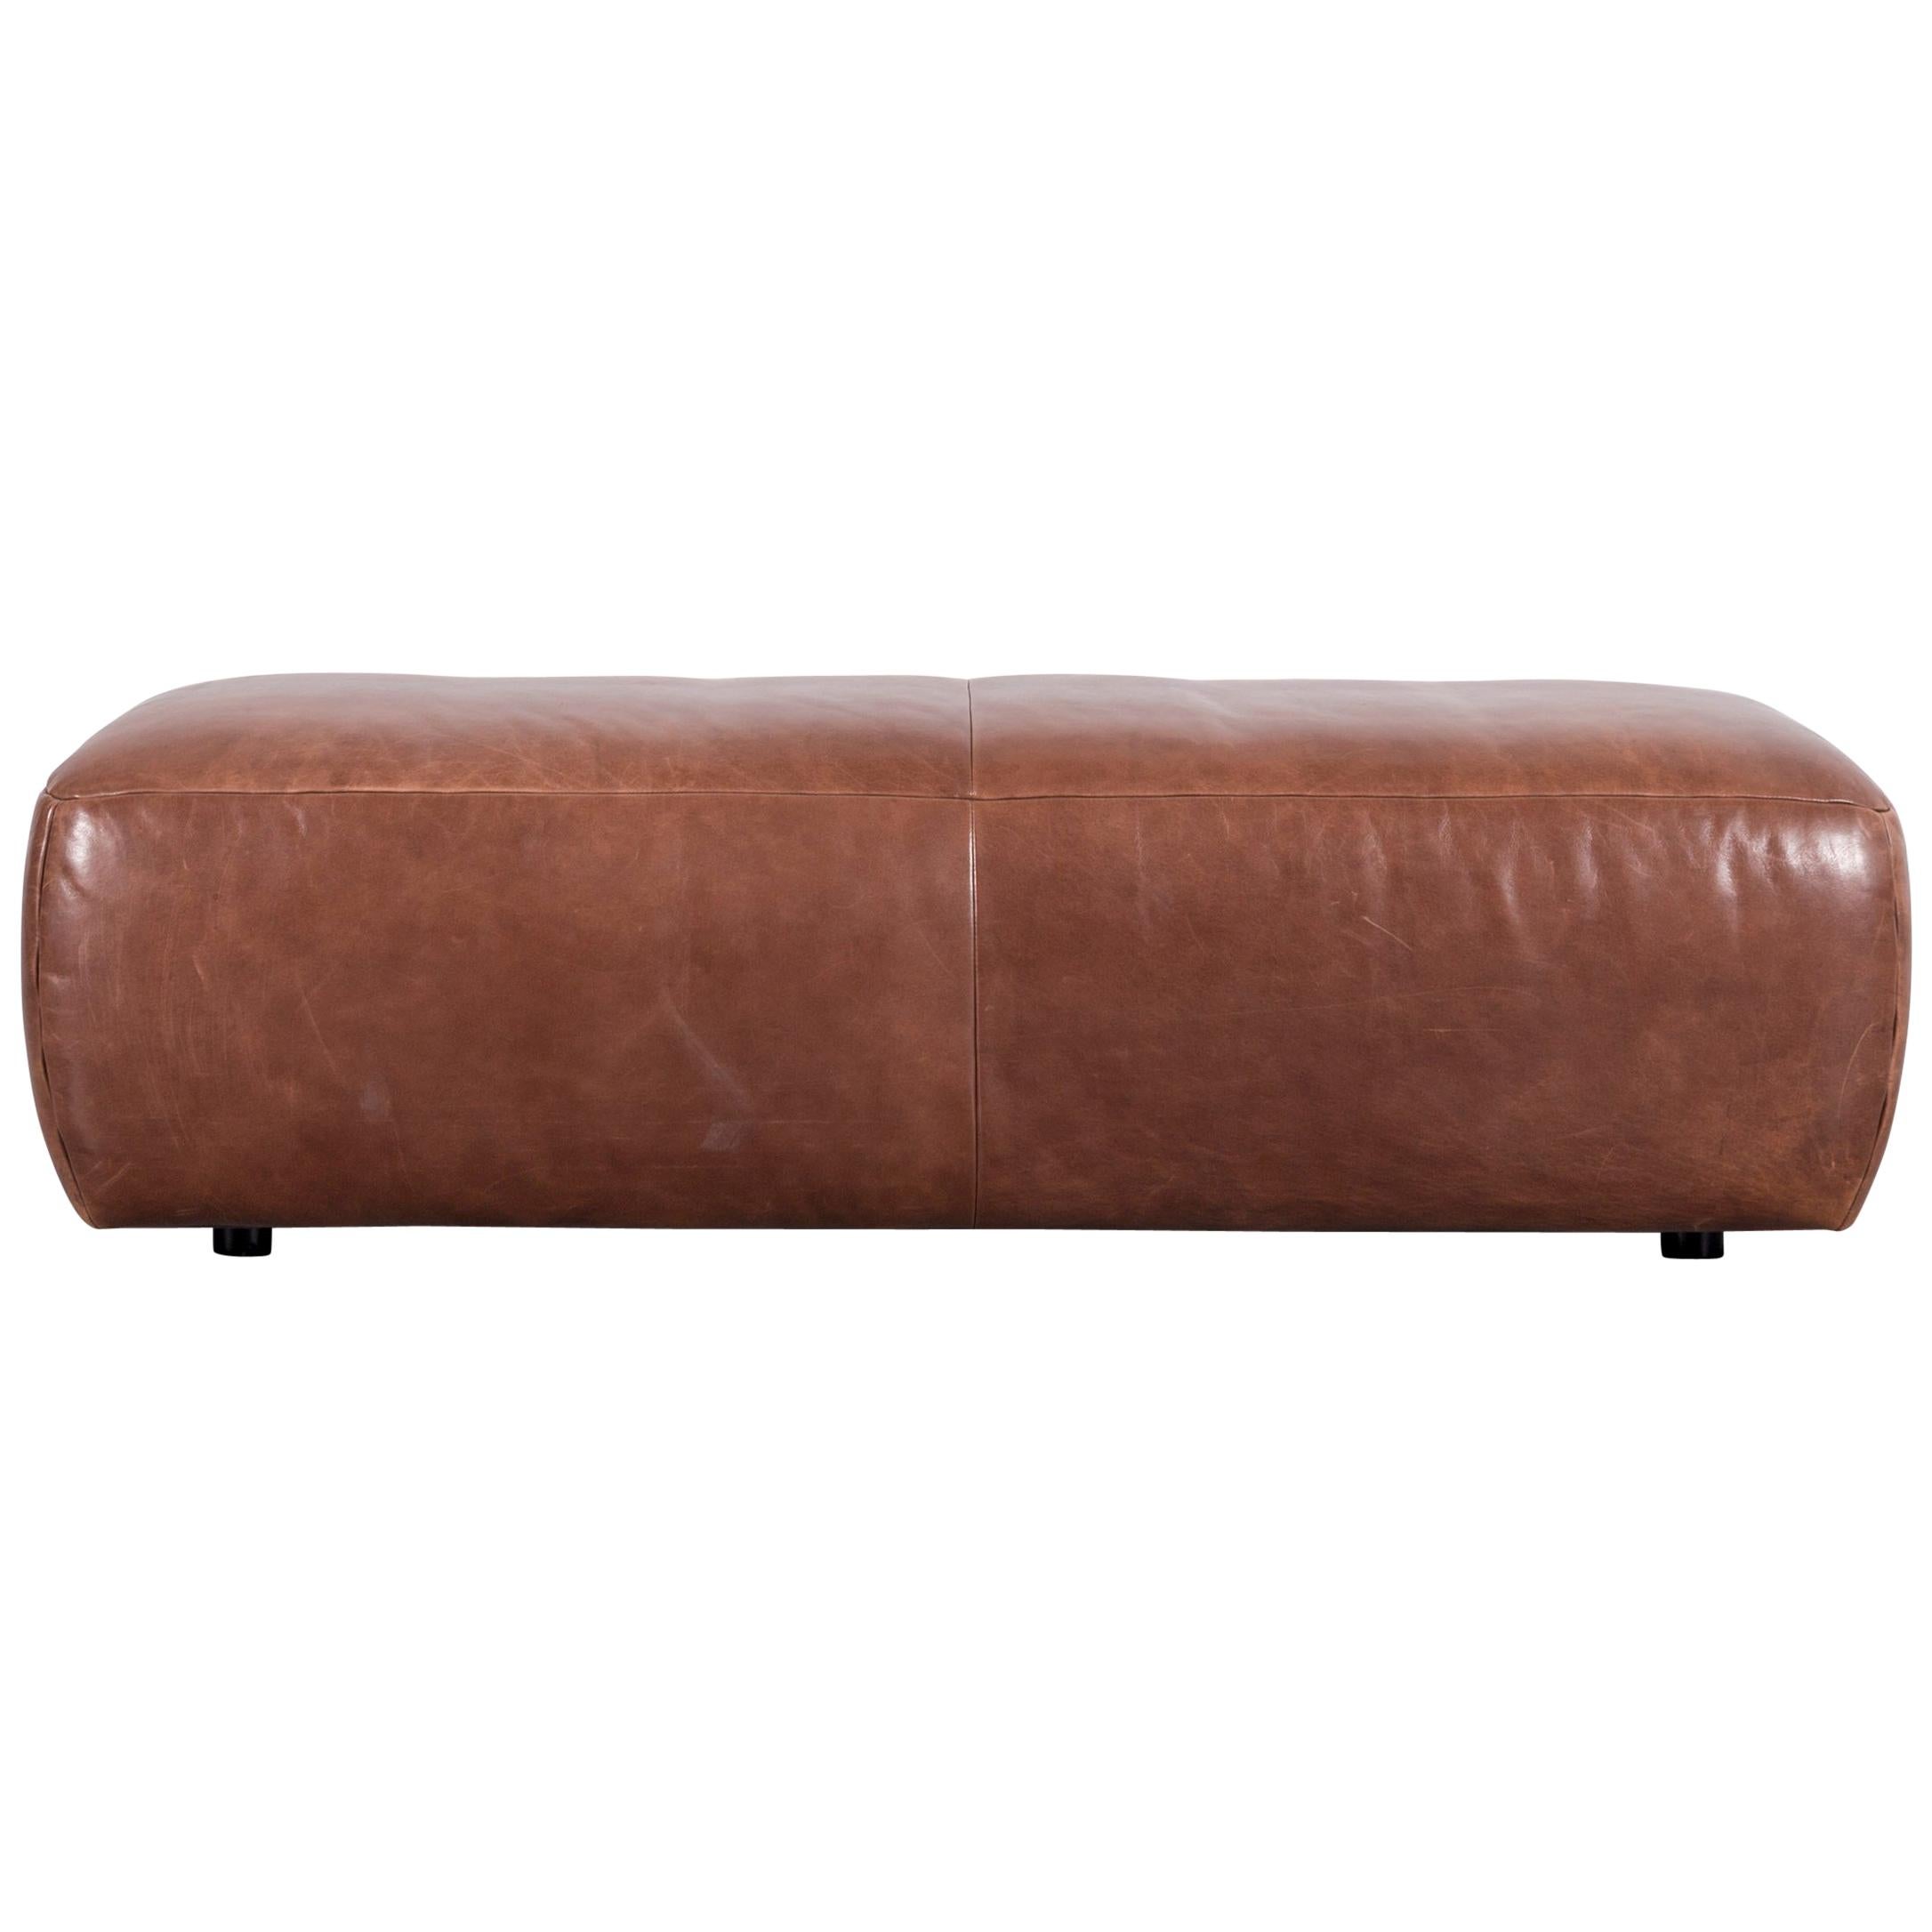 Koinor Alexa Leather Foot-Stool Brown Bench